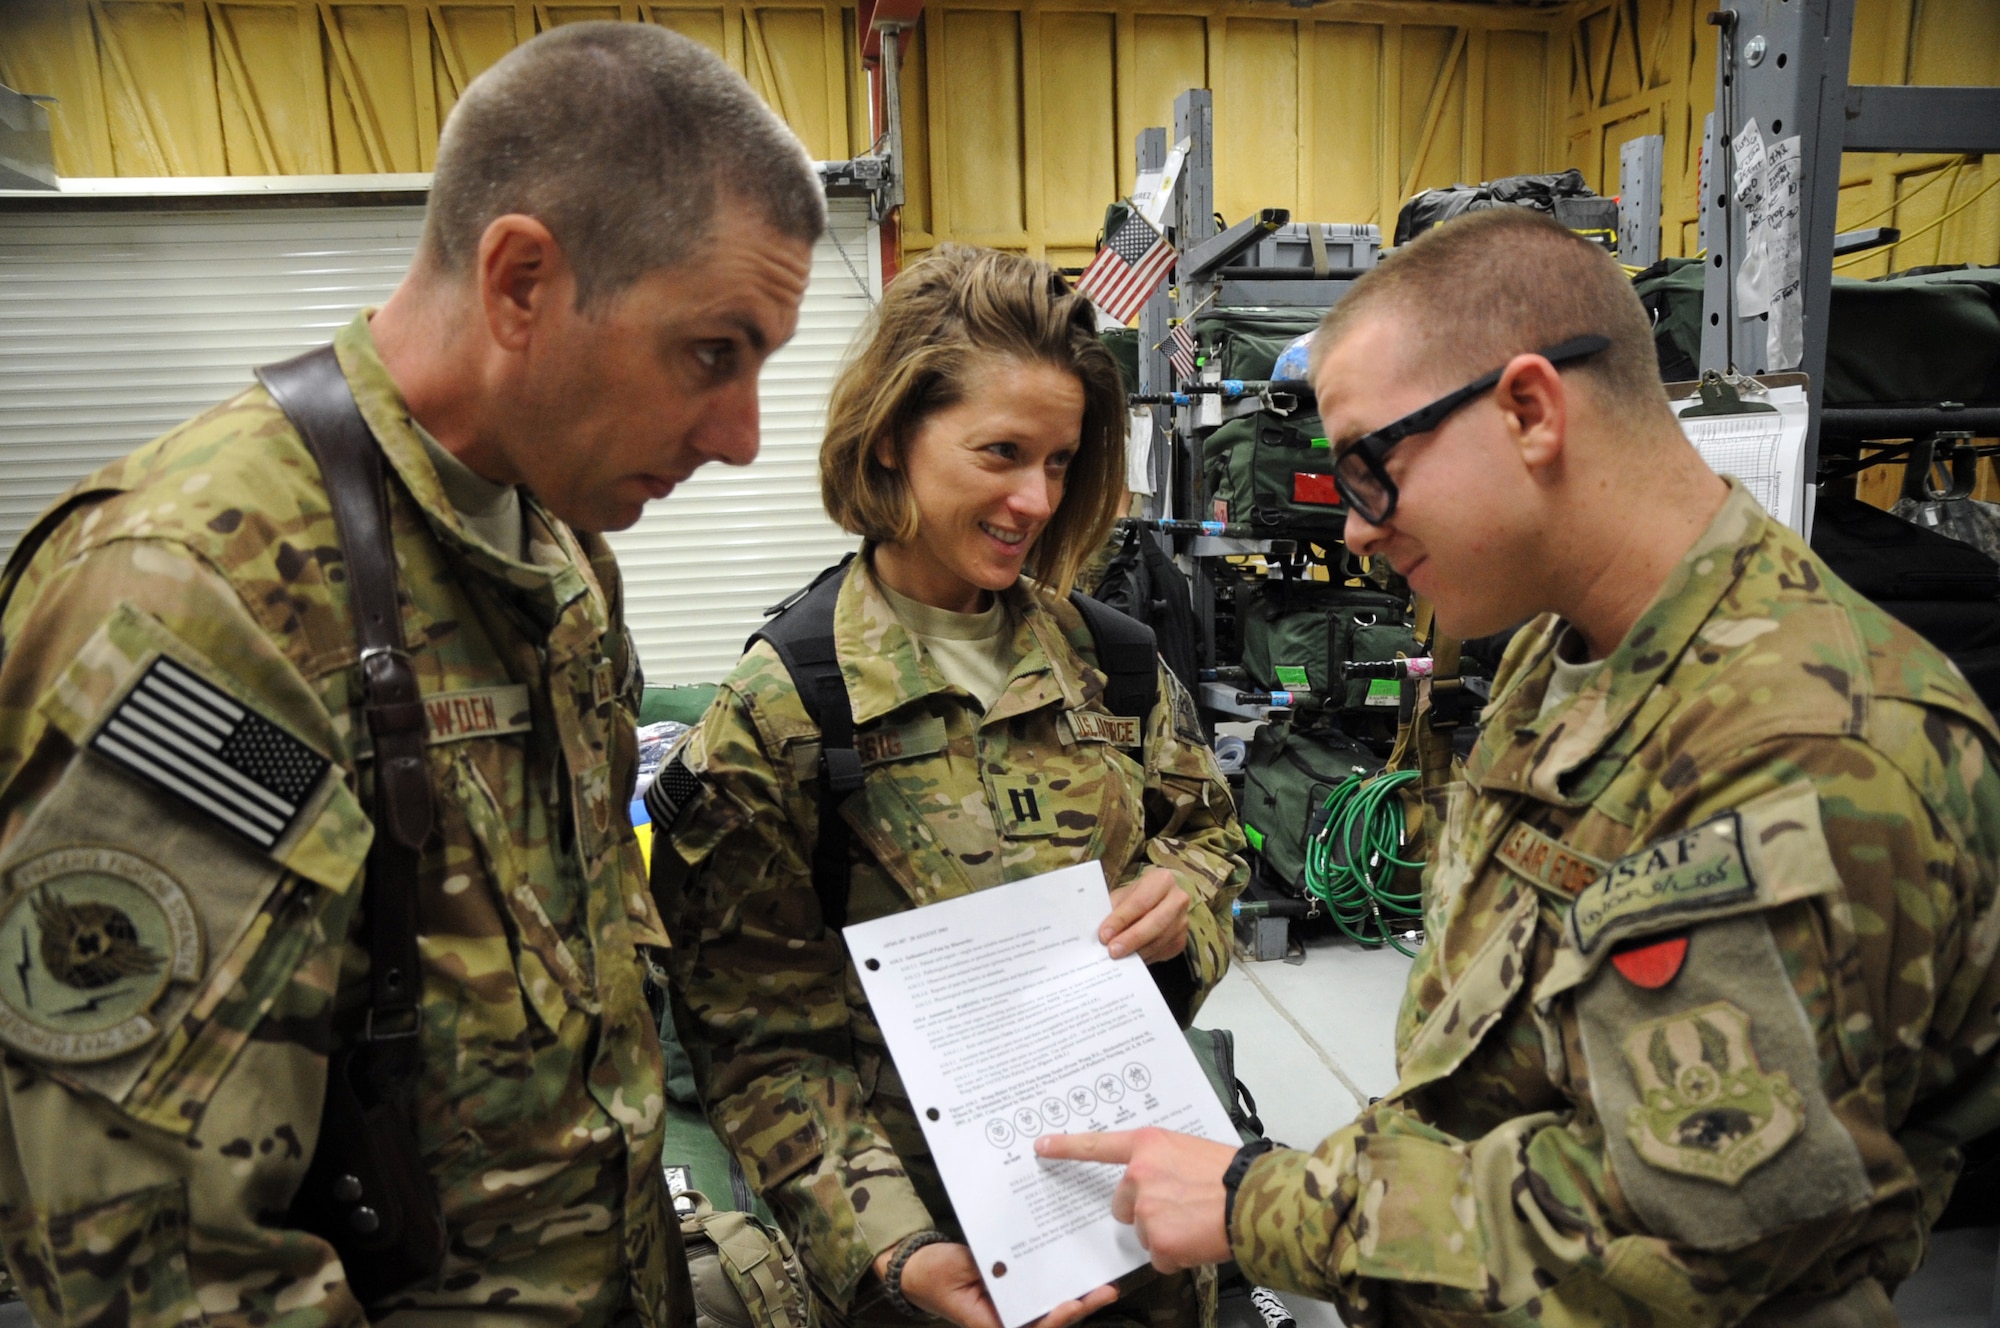 Tech. Sgt. Abraham Lowden, 455th Expeditionary Aeromedical Evacuation Squadron medical technician, and Capt. Andrea Essig, 455th EAES flight nurse, discuss the Wong-Baker faces pain rating scale with Airman 1st Class Adam Heil on Bagram Airfield, Afghanistan, May 29, 2013. Essig and Lowden used this nonverbal tool recently while transporting an injured Afghan boy who did not speak English. (U.S. Air Force photo/Staff Sgt. David Dobrydney)